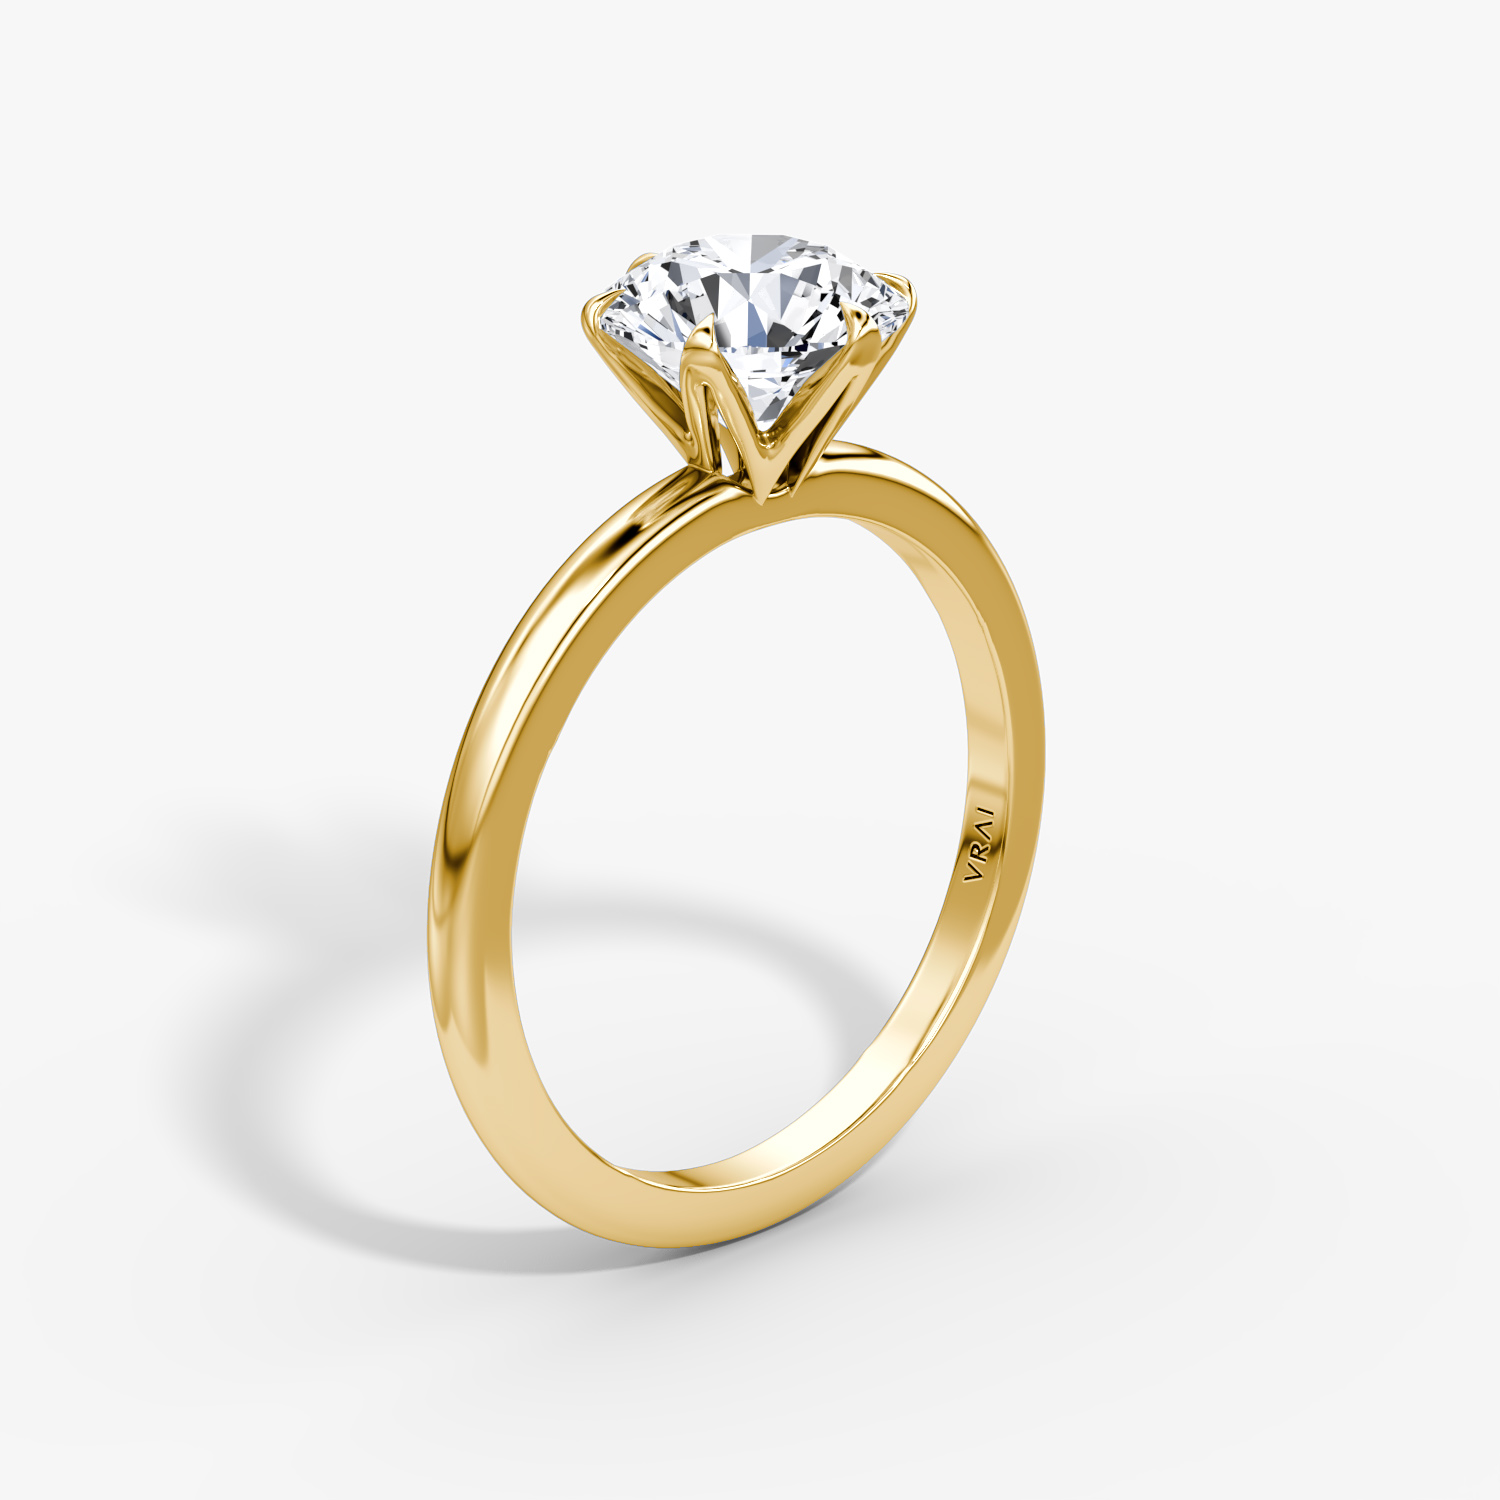 High set, 2.0 ct round solitaire | Round diamond engagement rings, Tiffany engagement  ring, Solitare engagement rings